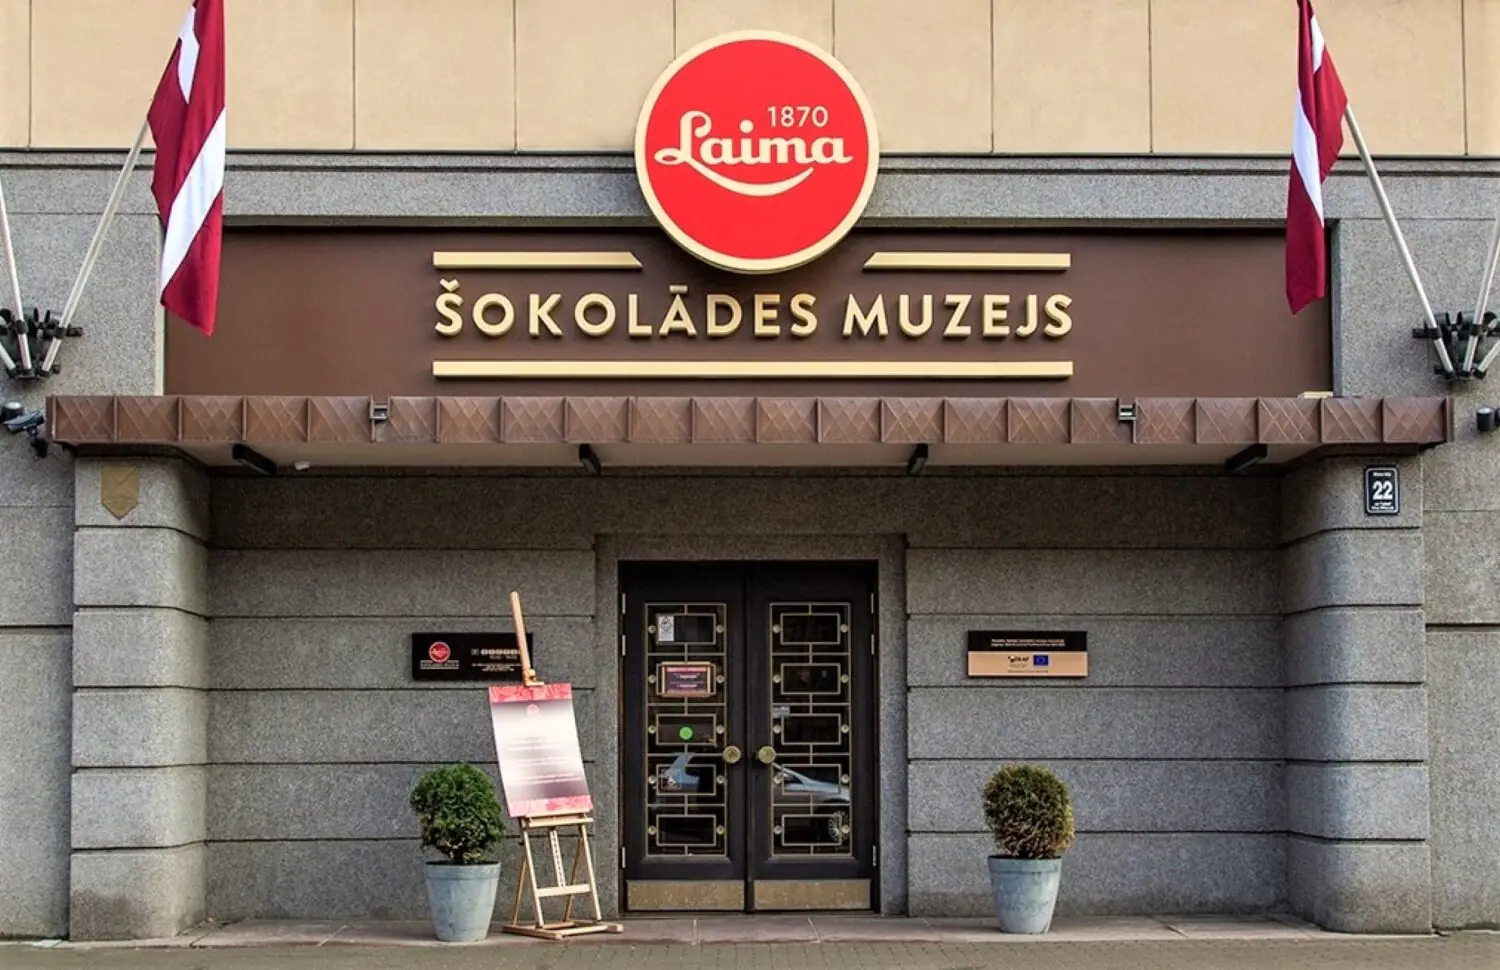 Chocolate factory Laima: history, museum and famous sweets